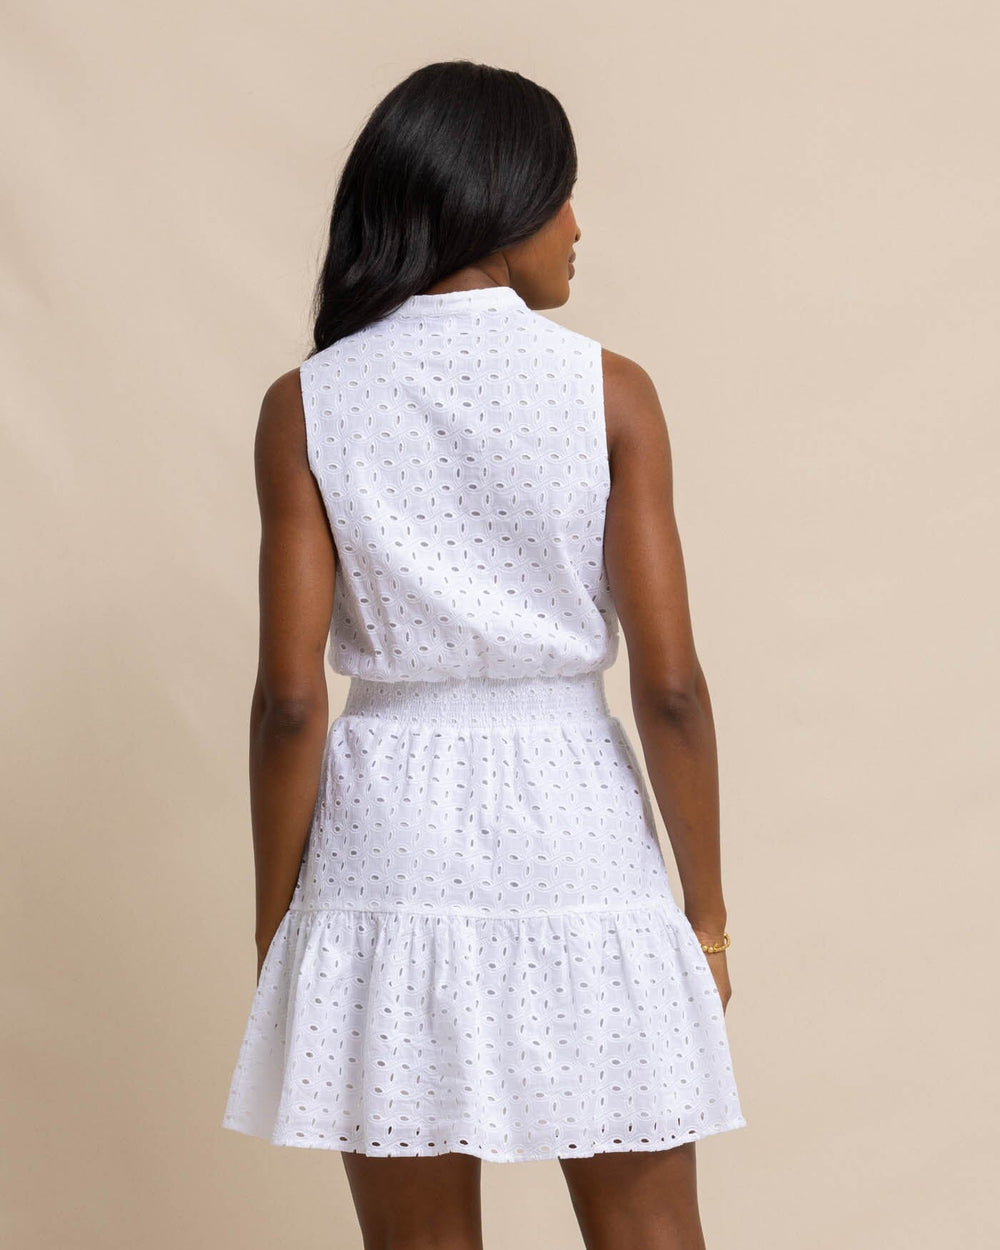 The back view of the Southern Tide Londyn Eyelet Dress by Southern Tide - Classic White